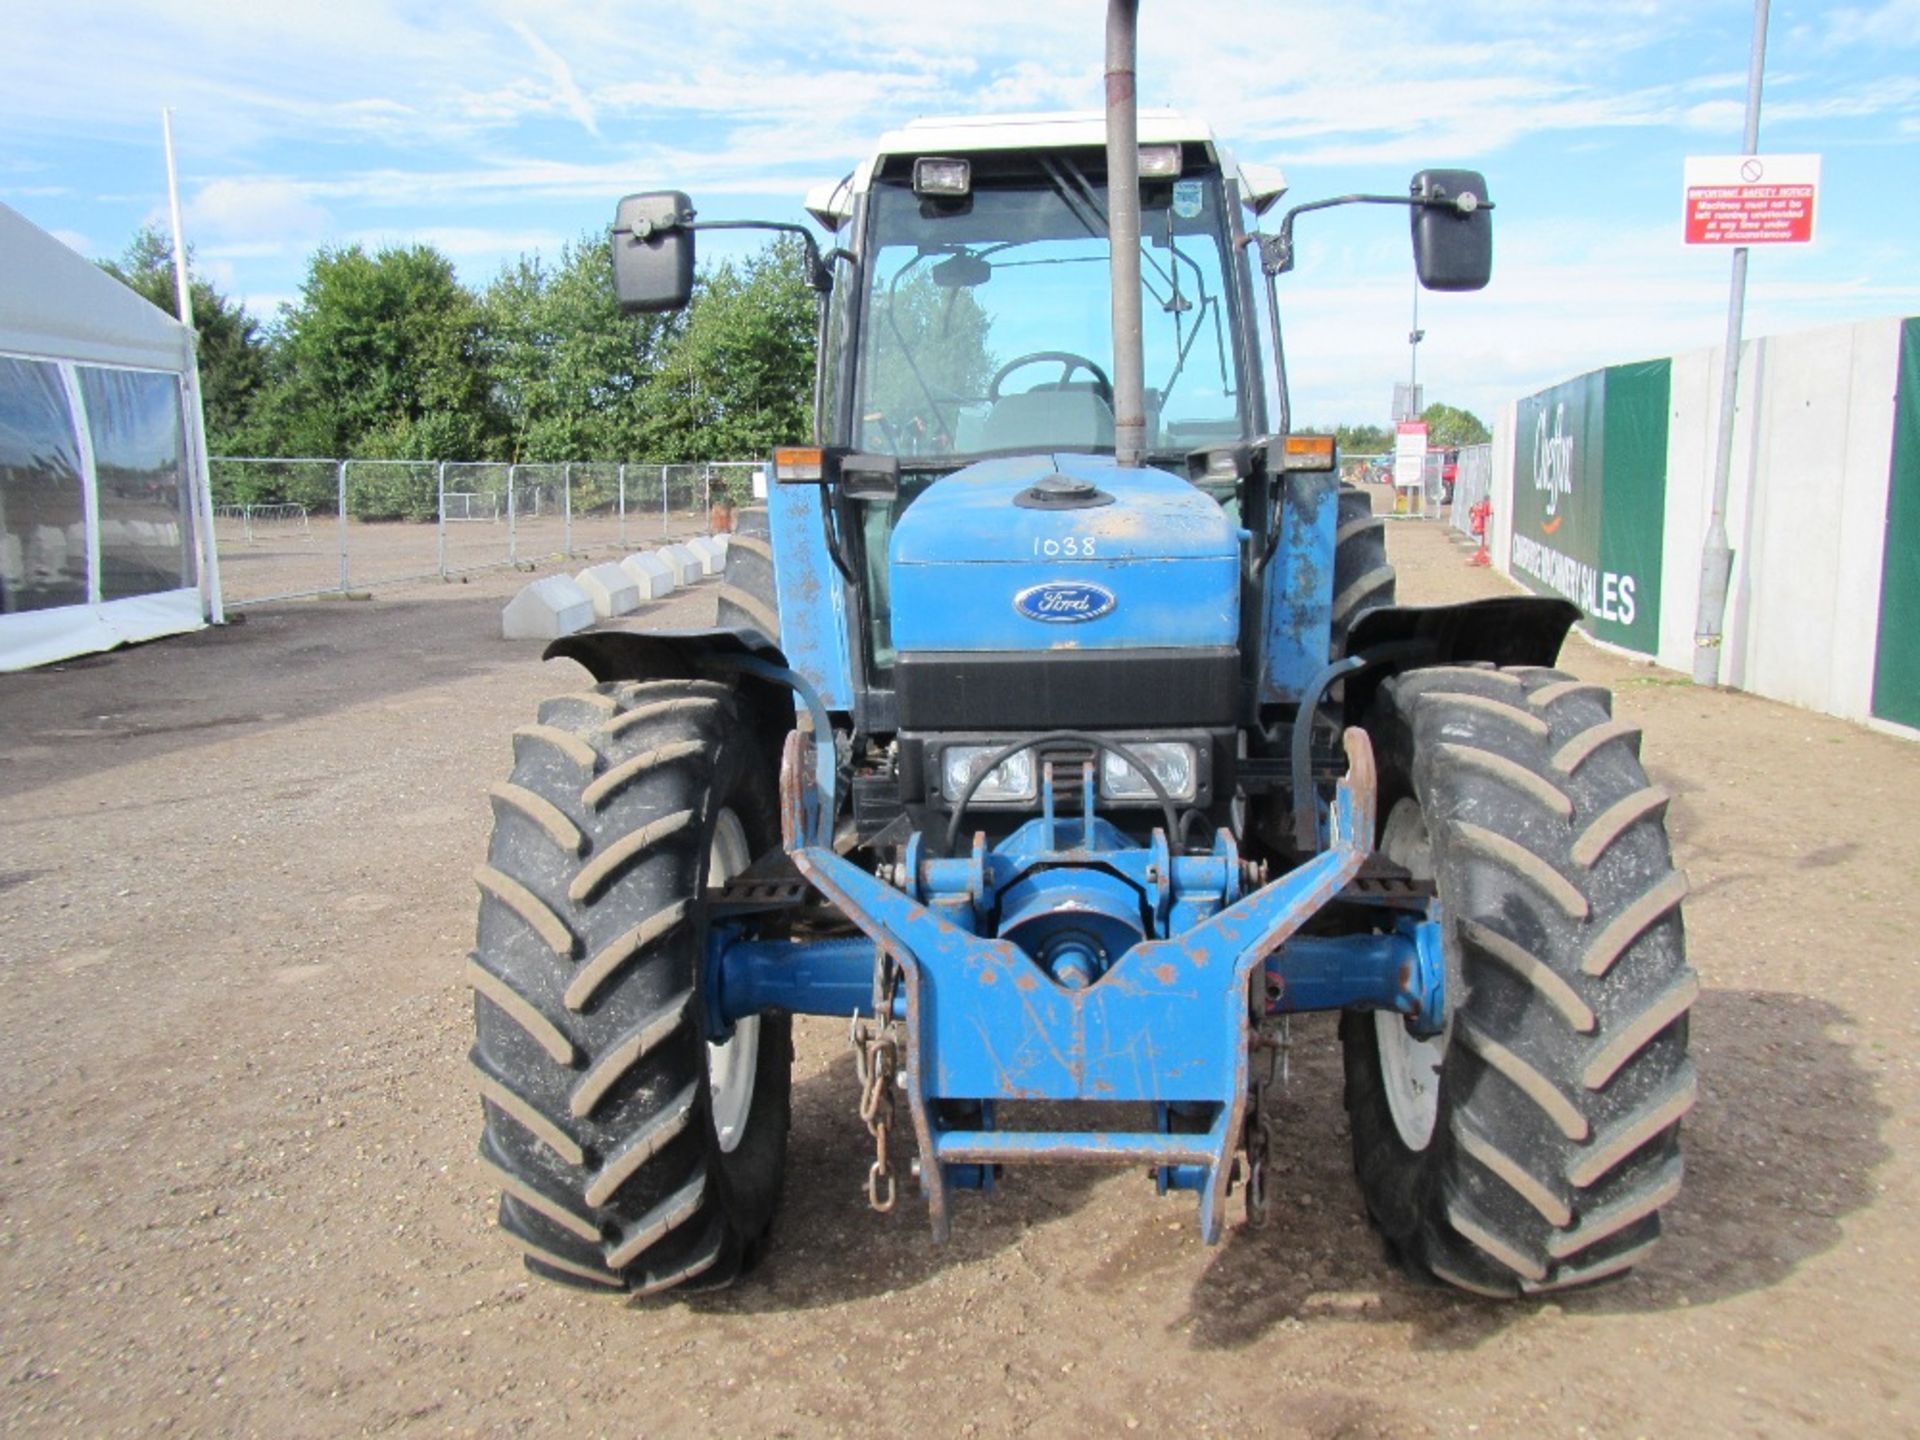 1994 Ford 8340 Powerstar SLE 4wd Tractor with Front Linkage & PTO Reg. No. L379 ELJ Ser No BD79914 - Image 2 of 18